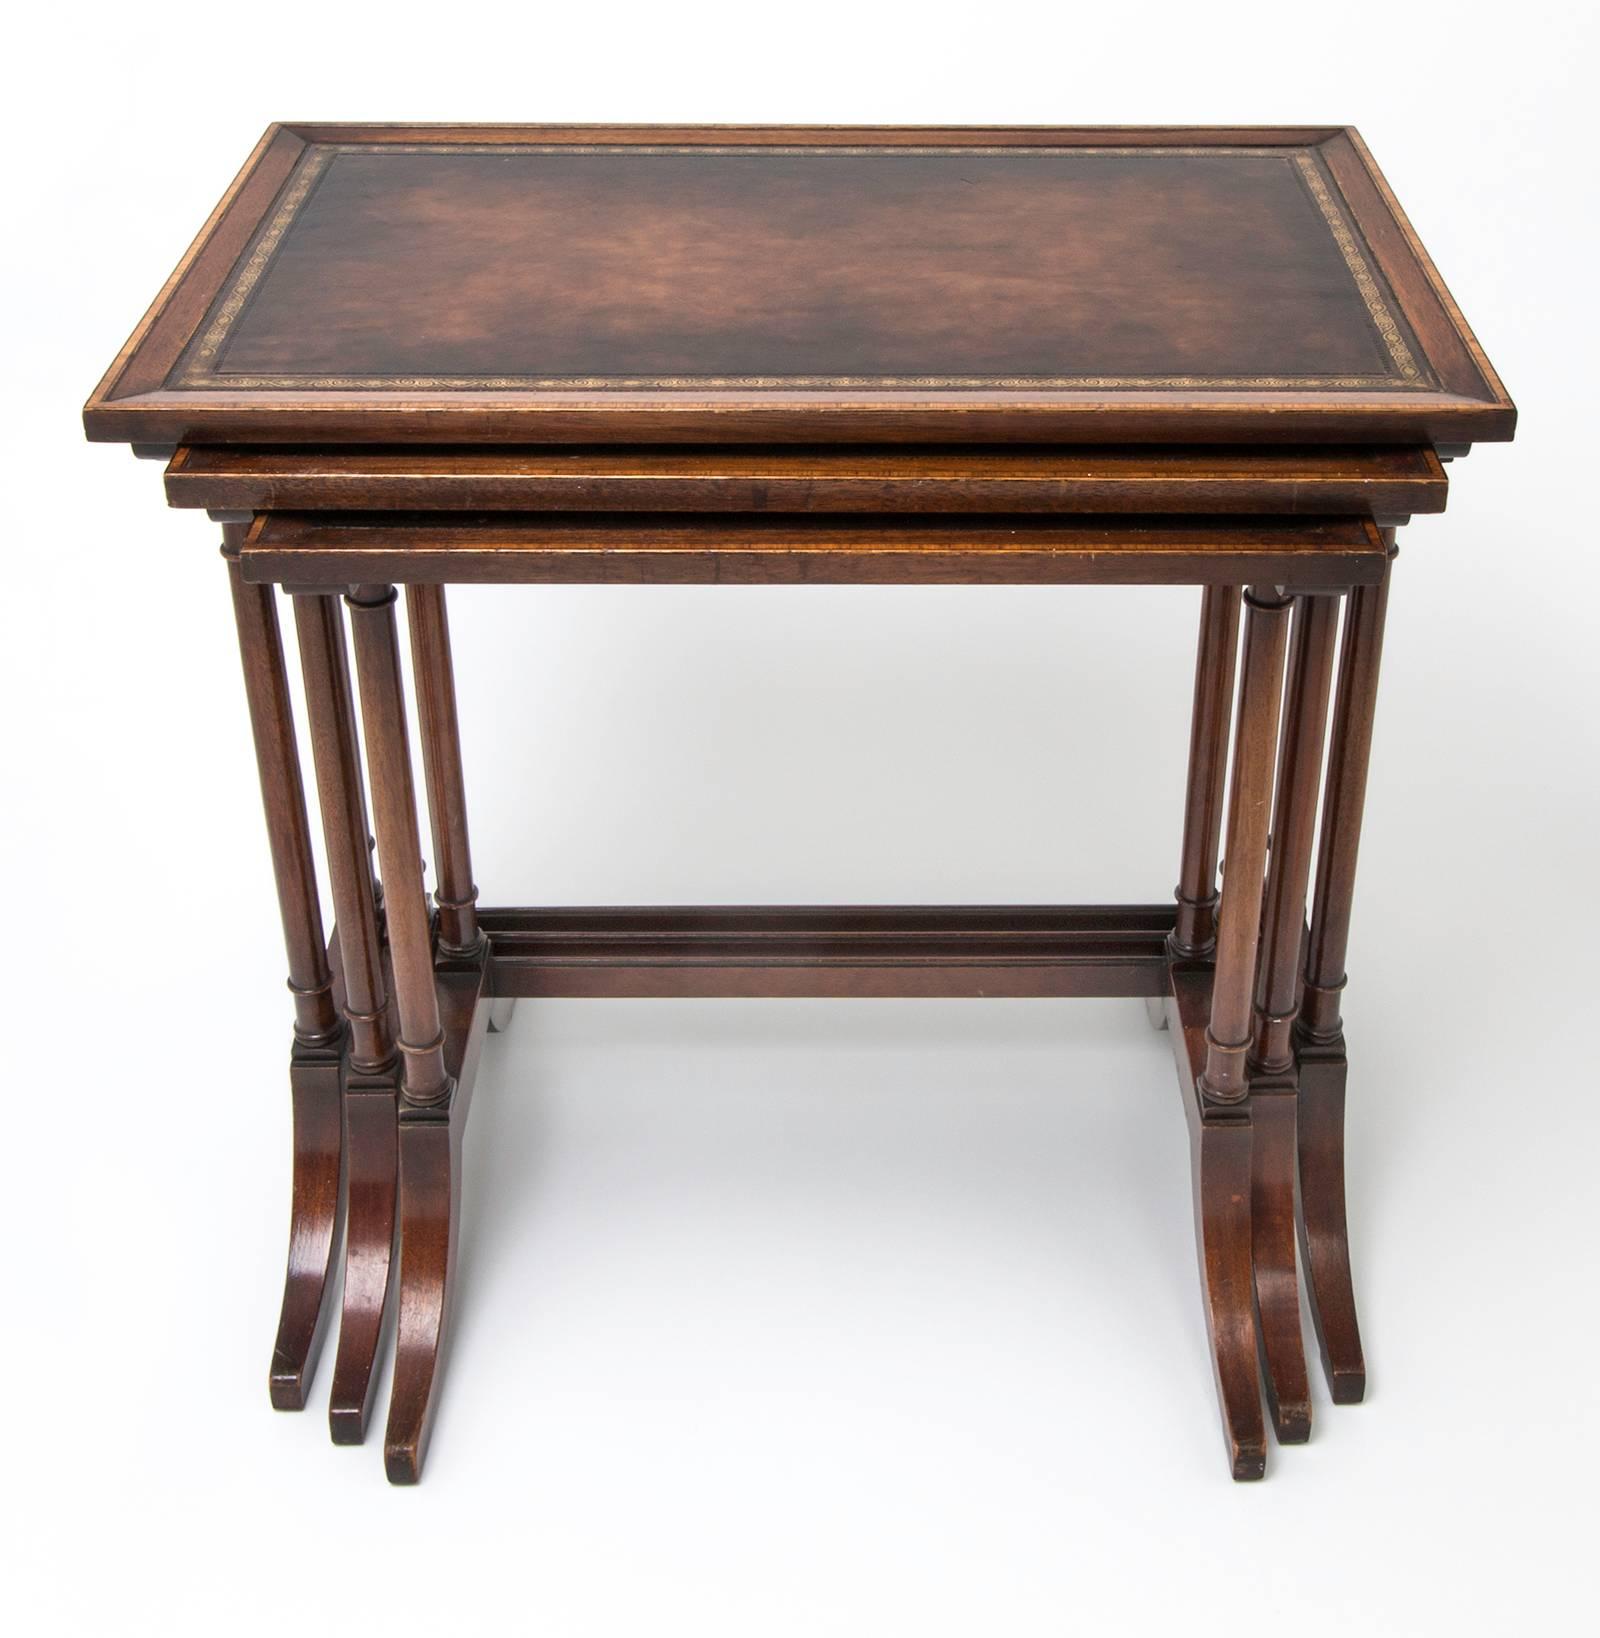 1920s, refined George III style mahogany nesting tables. Beautiful inset leather top tooled trim in 23-karat gold. Columnar legs, supported by shaped sledge feet. Practical and handy addition to your room. Measures: Large 24 x 15 x 24, medium 21 x